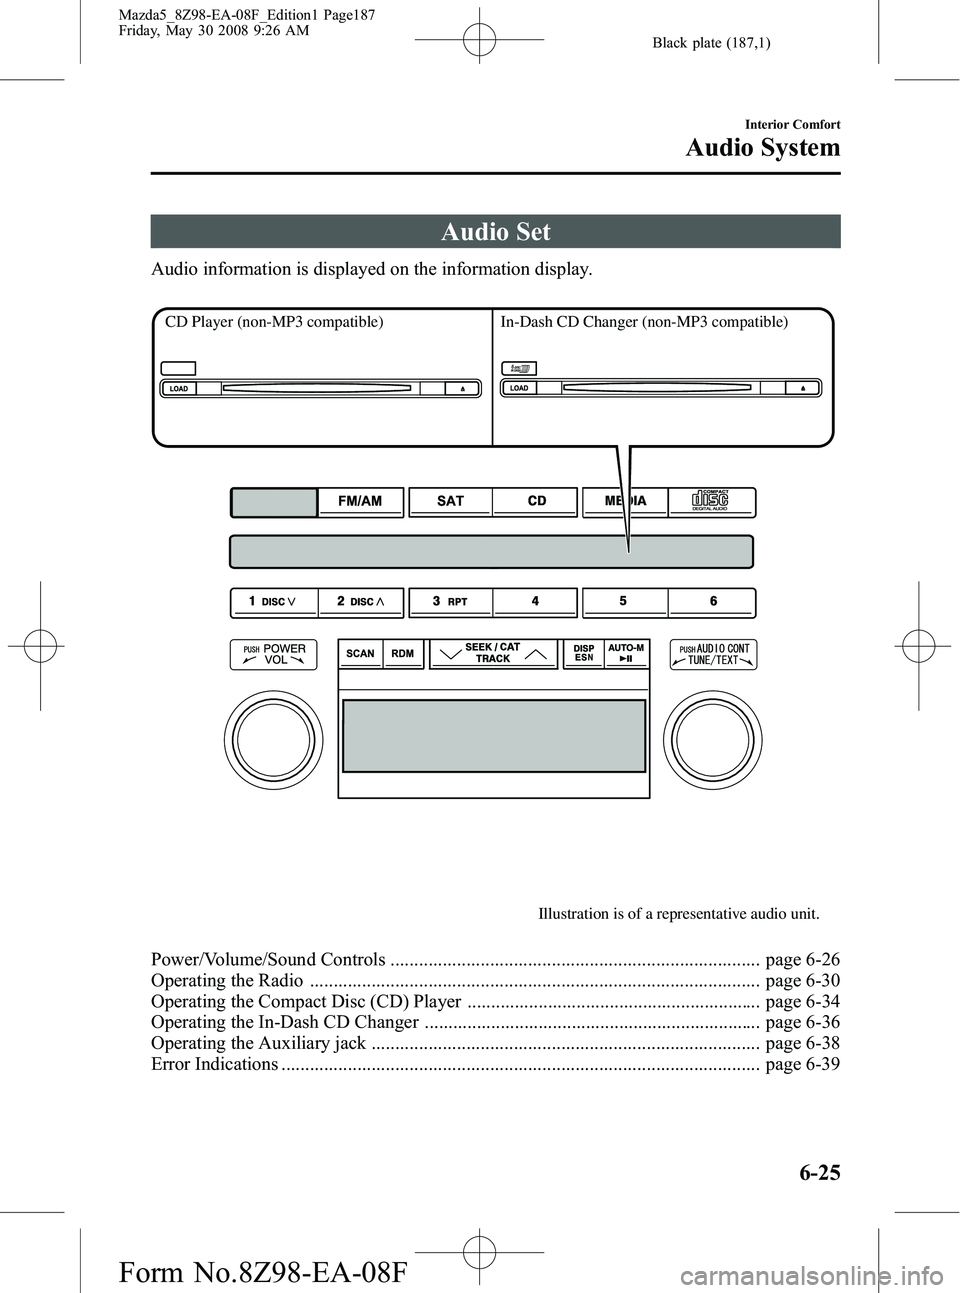 MAZDA MODEL 5 2009  Owners Manual Black plate (187,1)
Audio Set
Audio information is displayed on the information display.
Illustration is of a representative audio unit.
CD Player 
(non-MP3 compatible)In-Dash CD Changer (non-MP3 comp